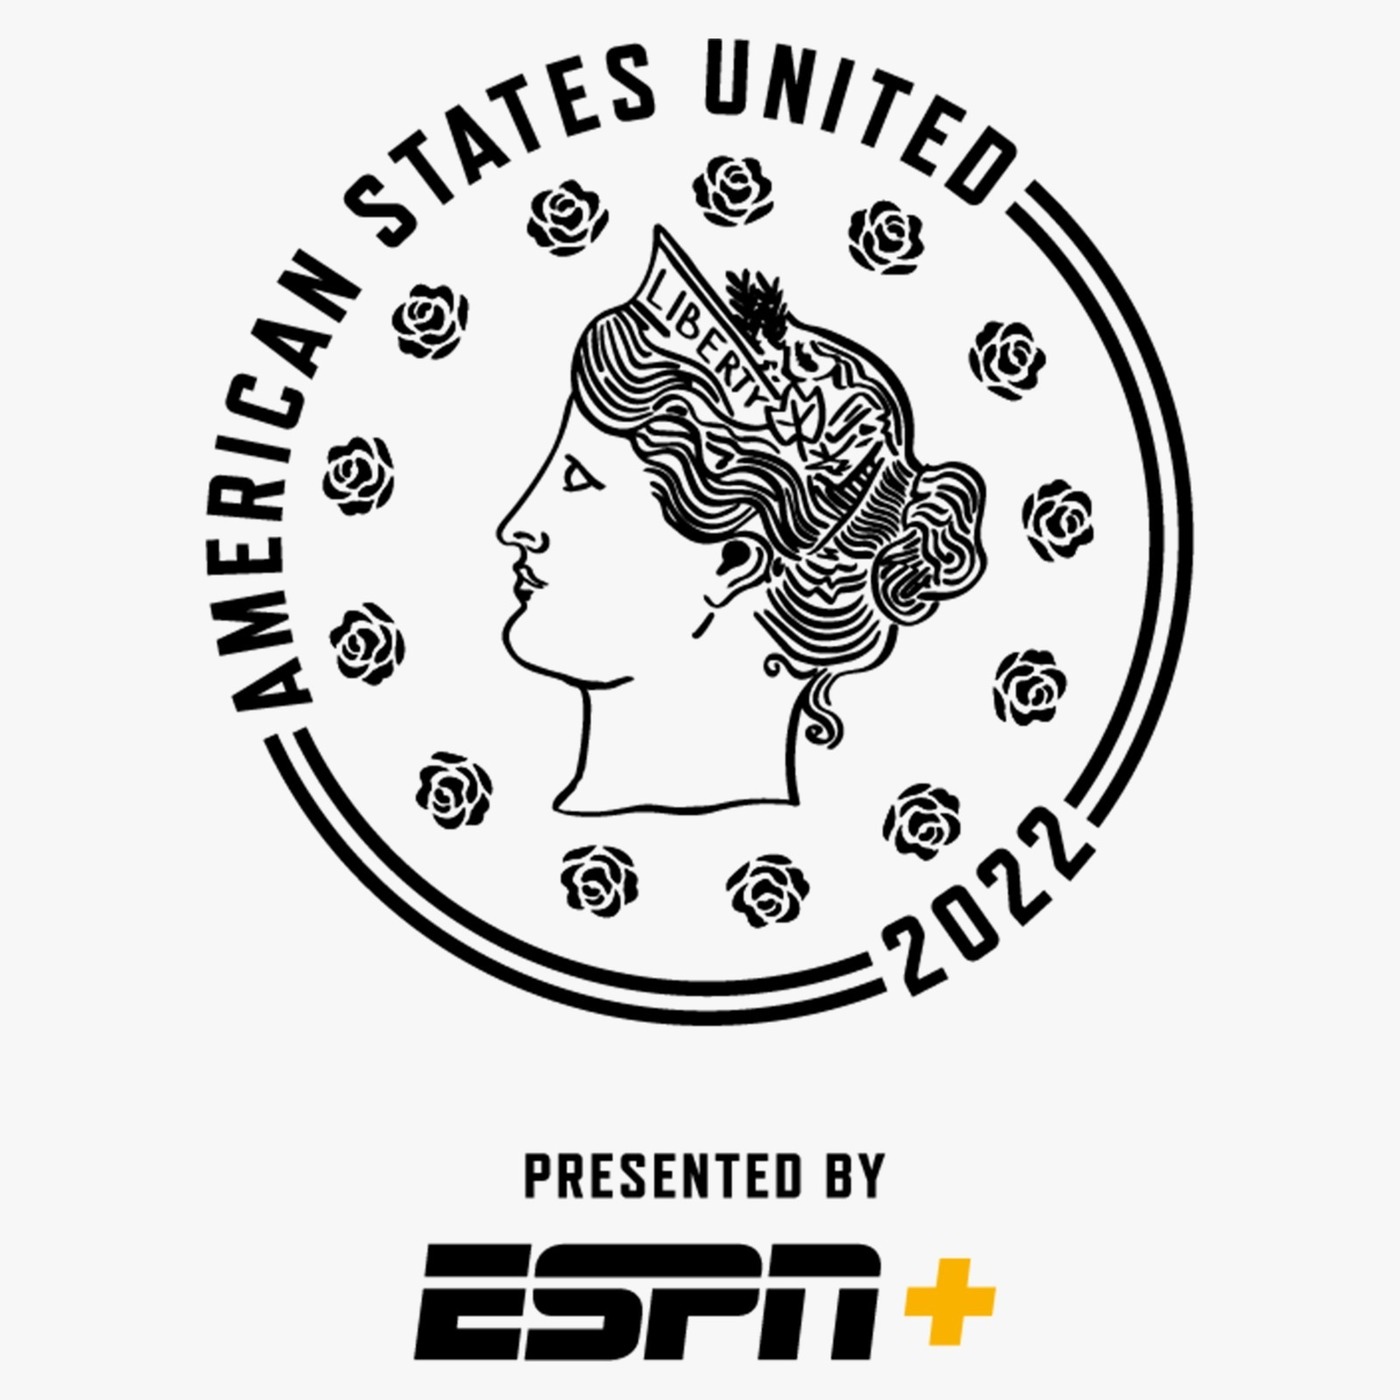 Men in Blazers: American States United with Daryl Dike, Presented by ESPN+